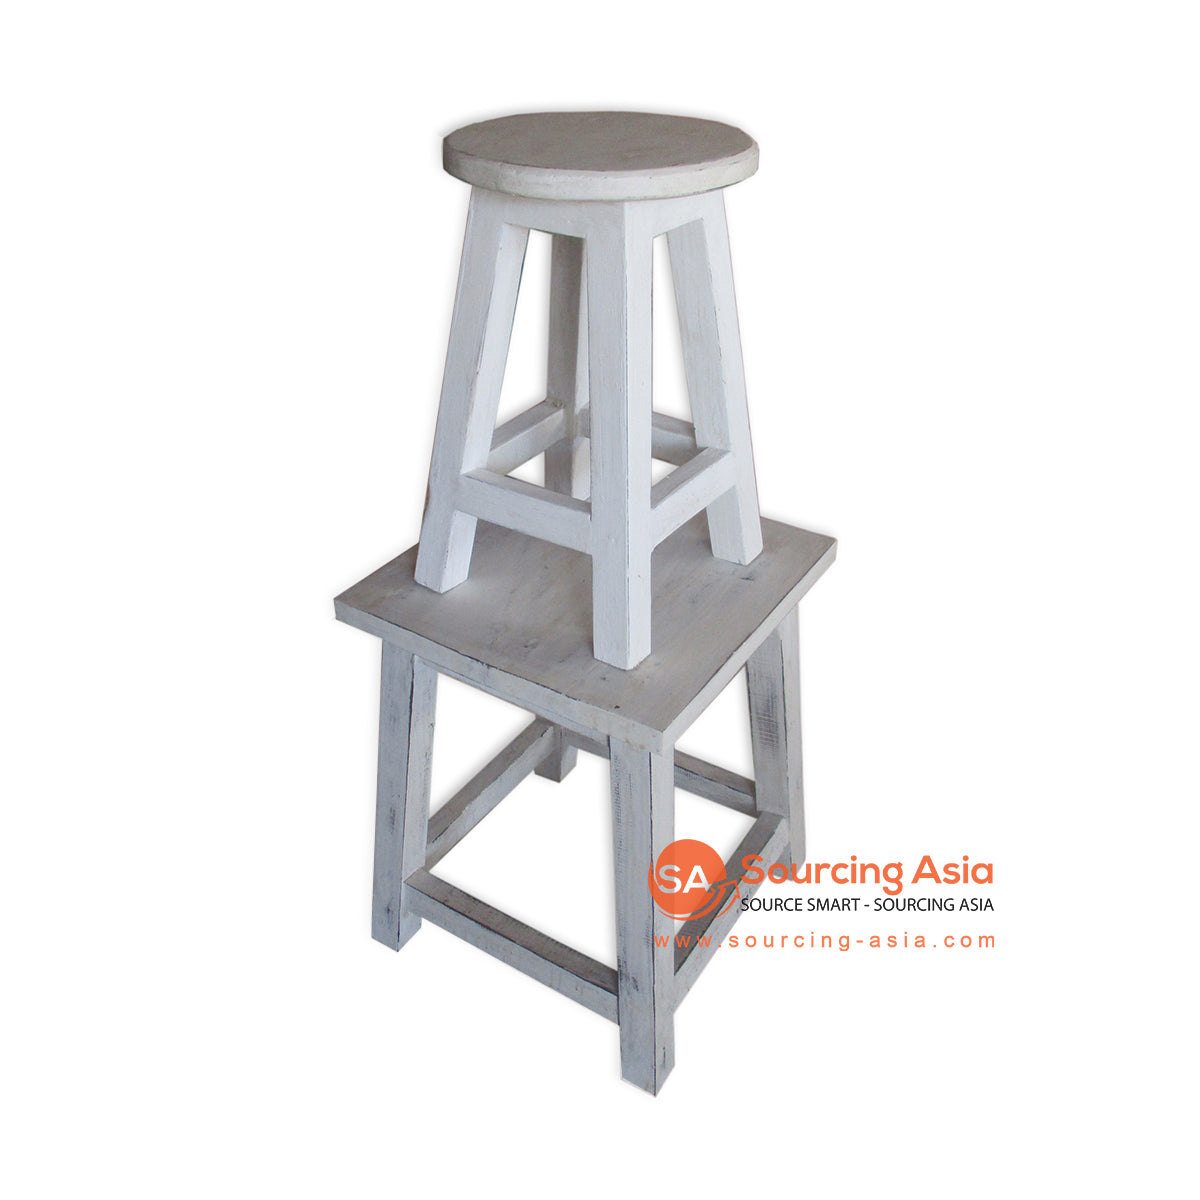 THE150 SET OF TWO WHITE WASH WOODEN STOOLS